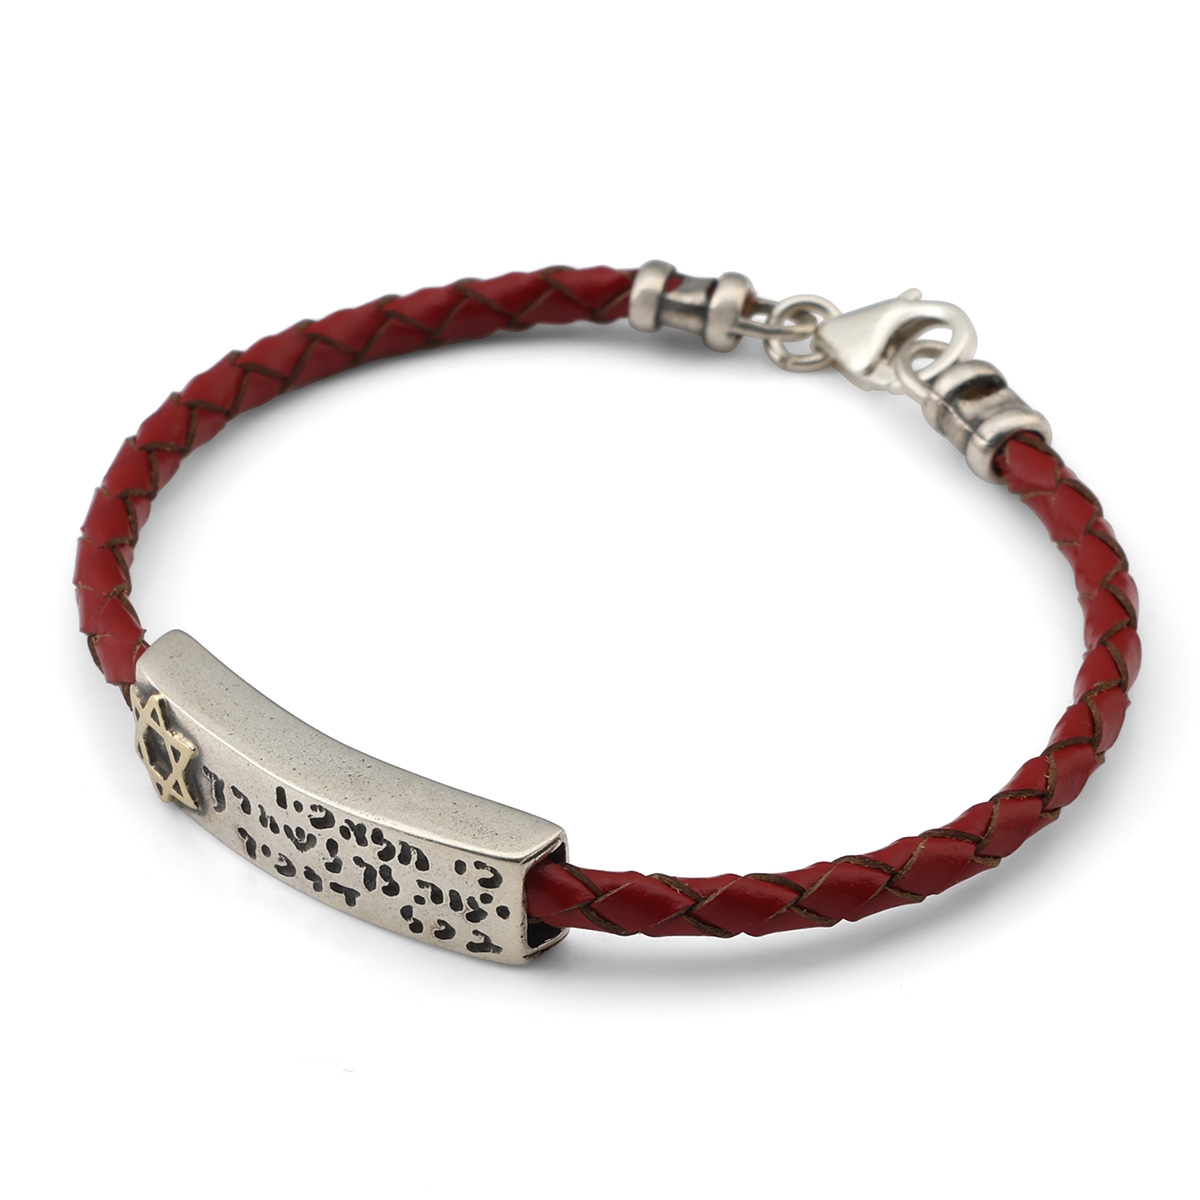 Engraved Traveler's Prayer on Red Braided Leather Band, Gold and Silver ...